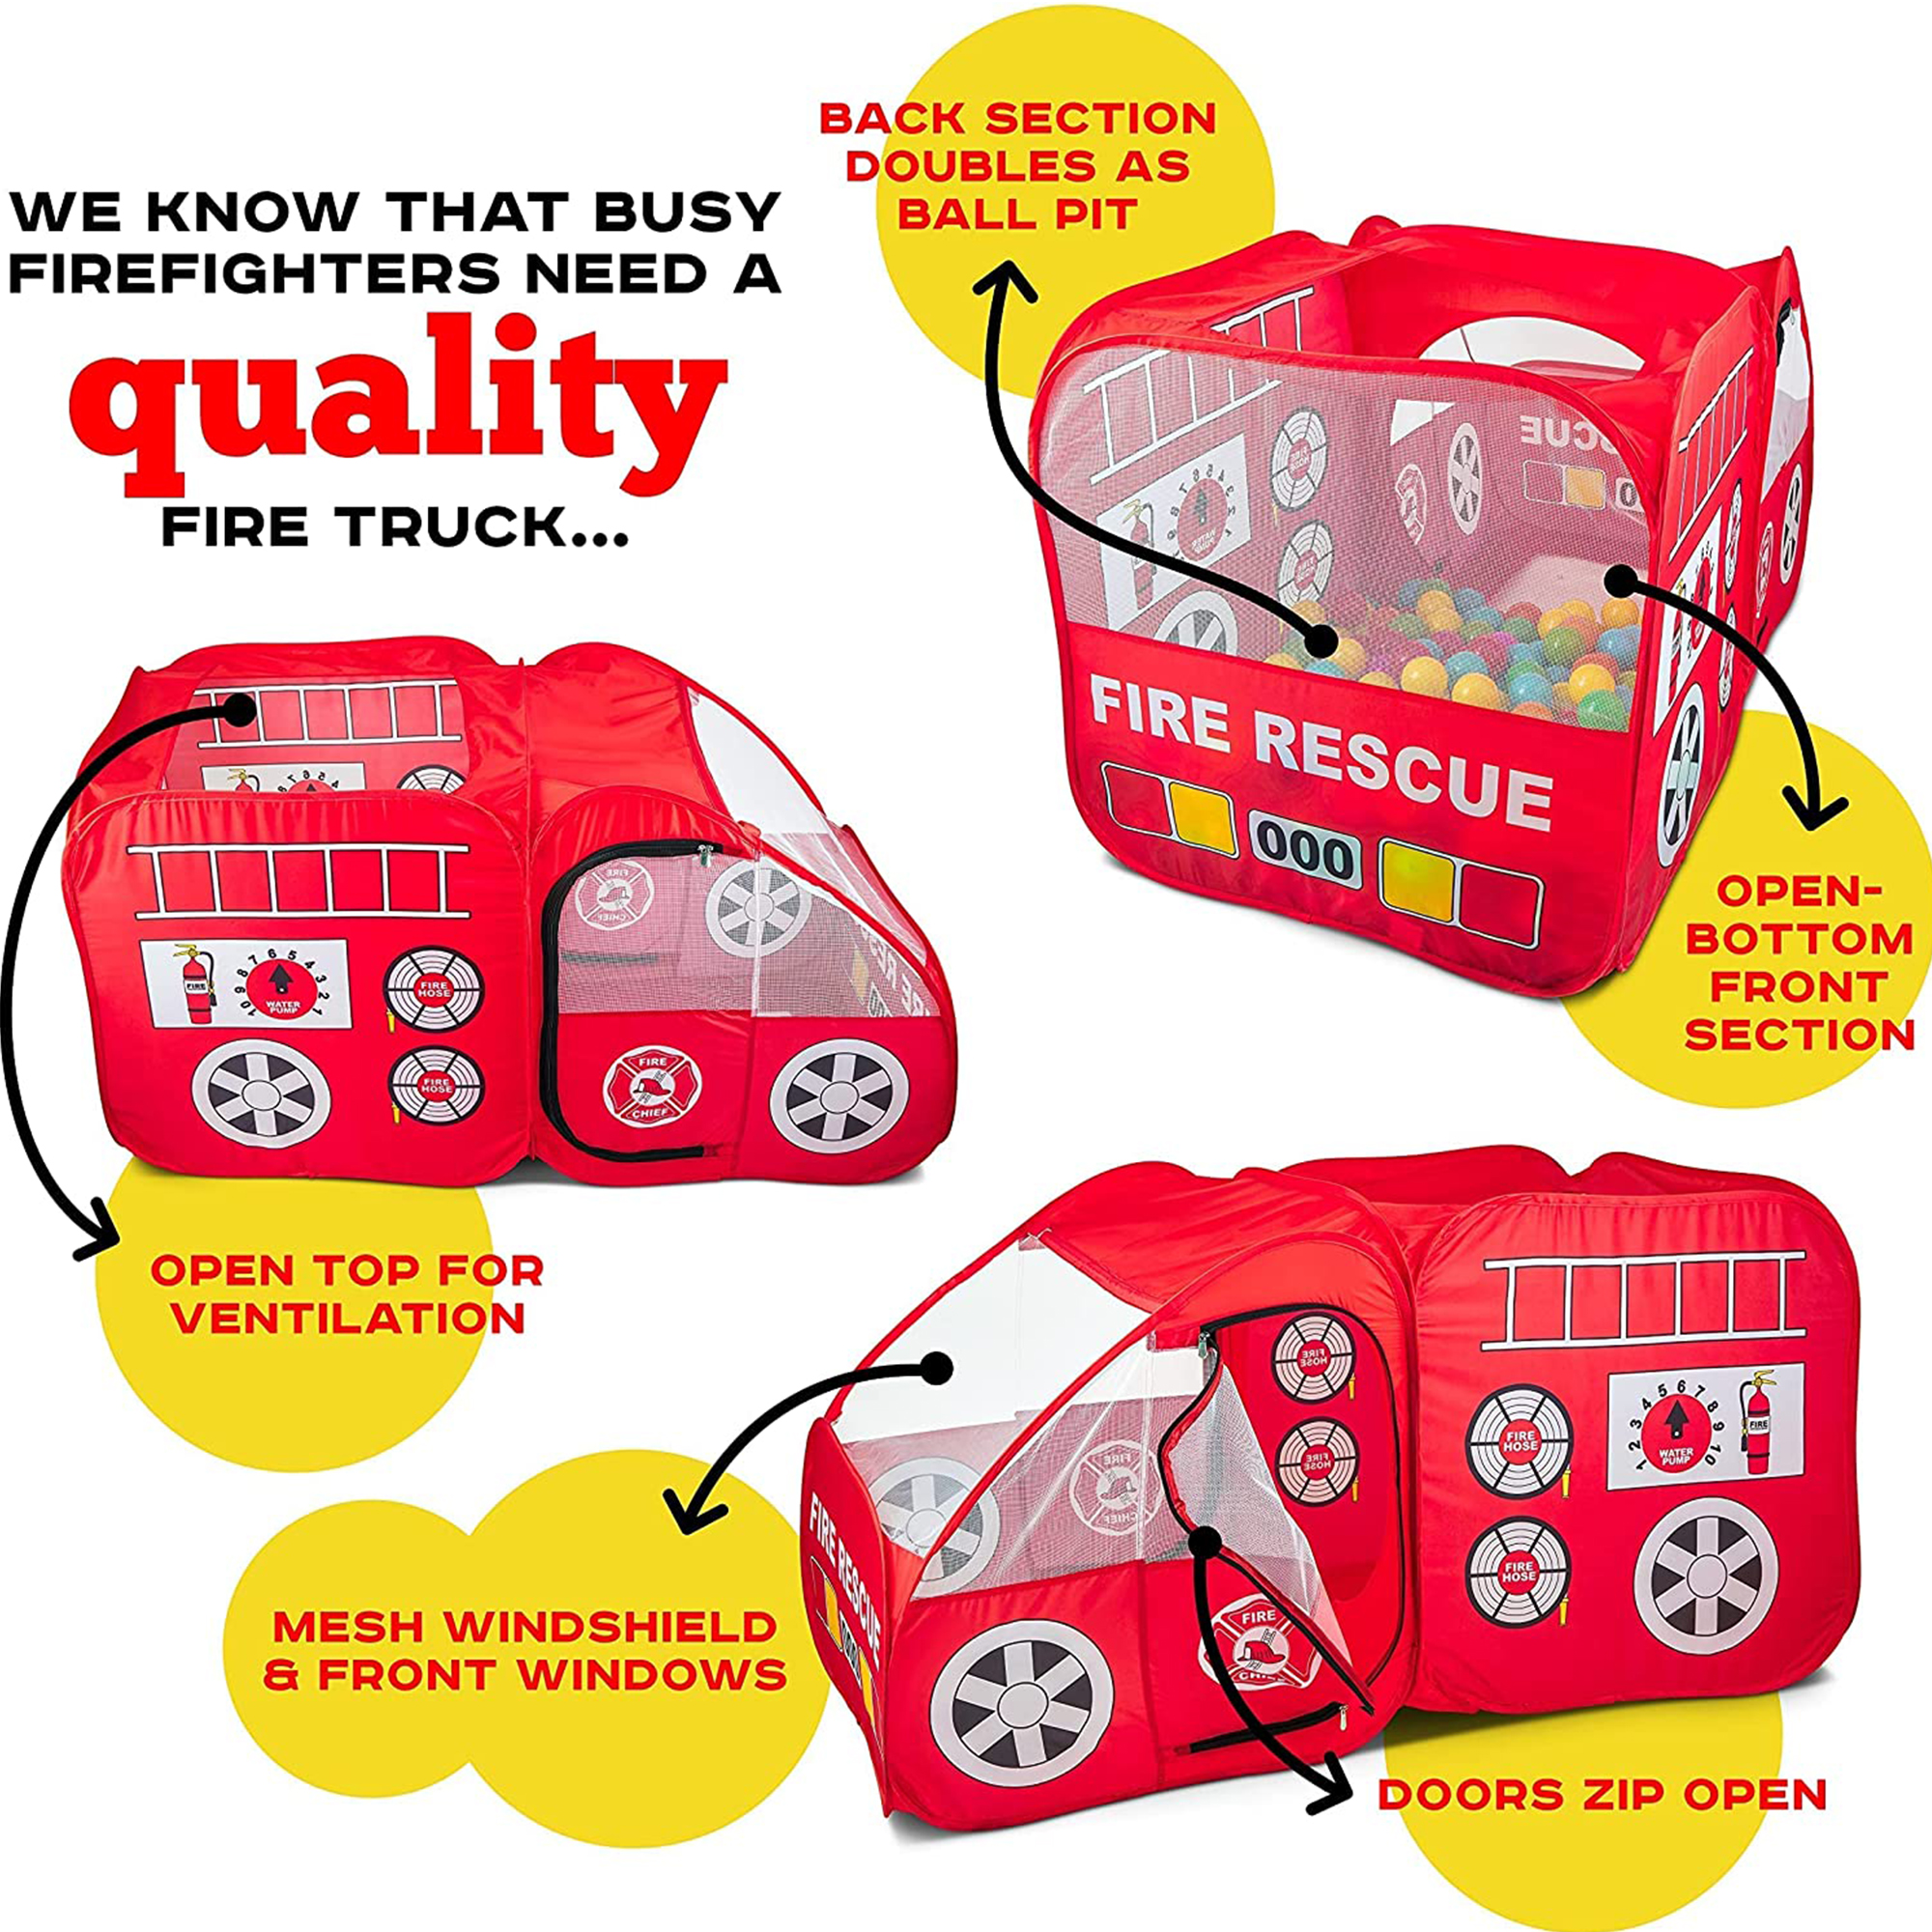 Kiddzery Pretend Playhouse Fire Truck Pop Up Play Tent for Kids with Siren Sound, Red - image 4 of 9